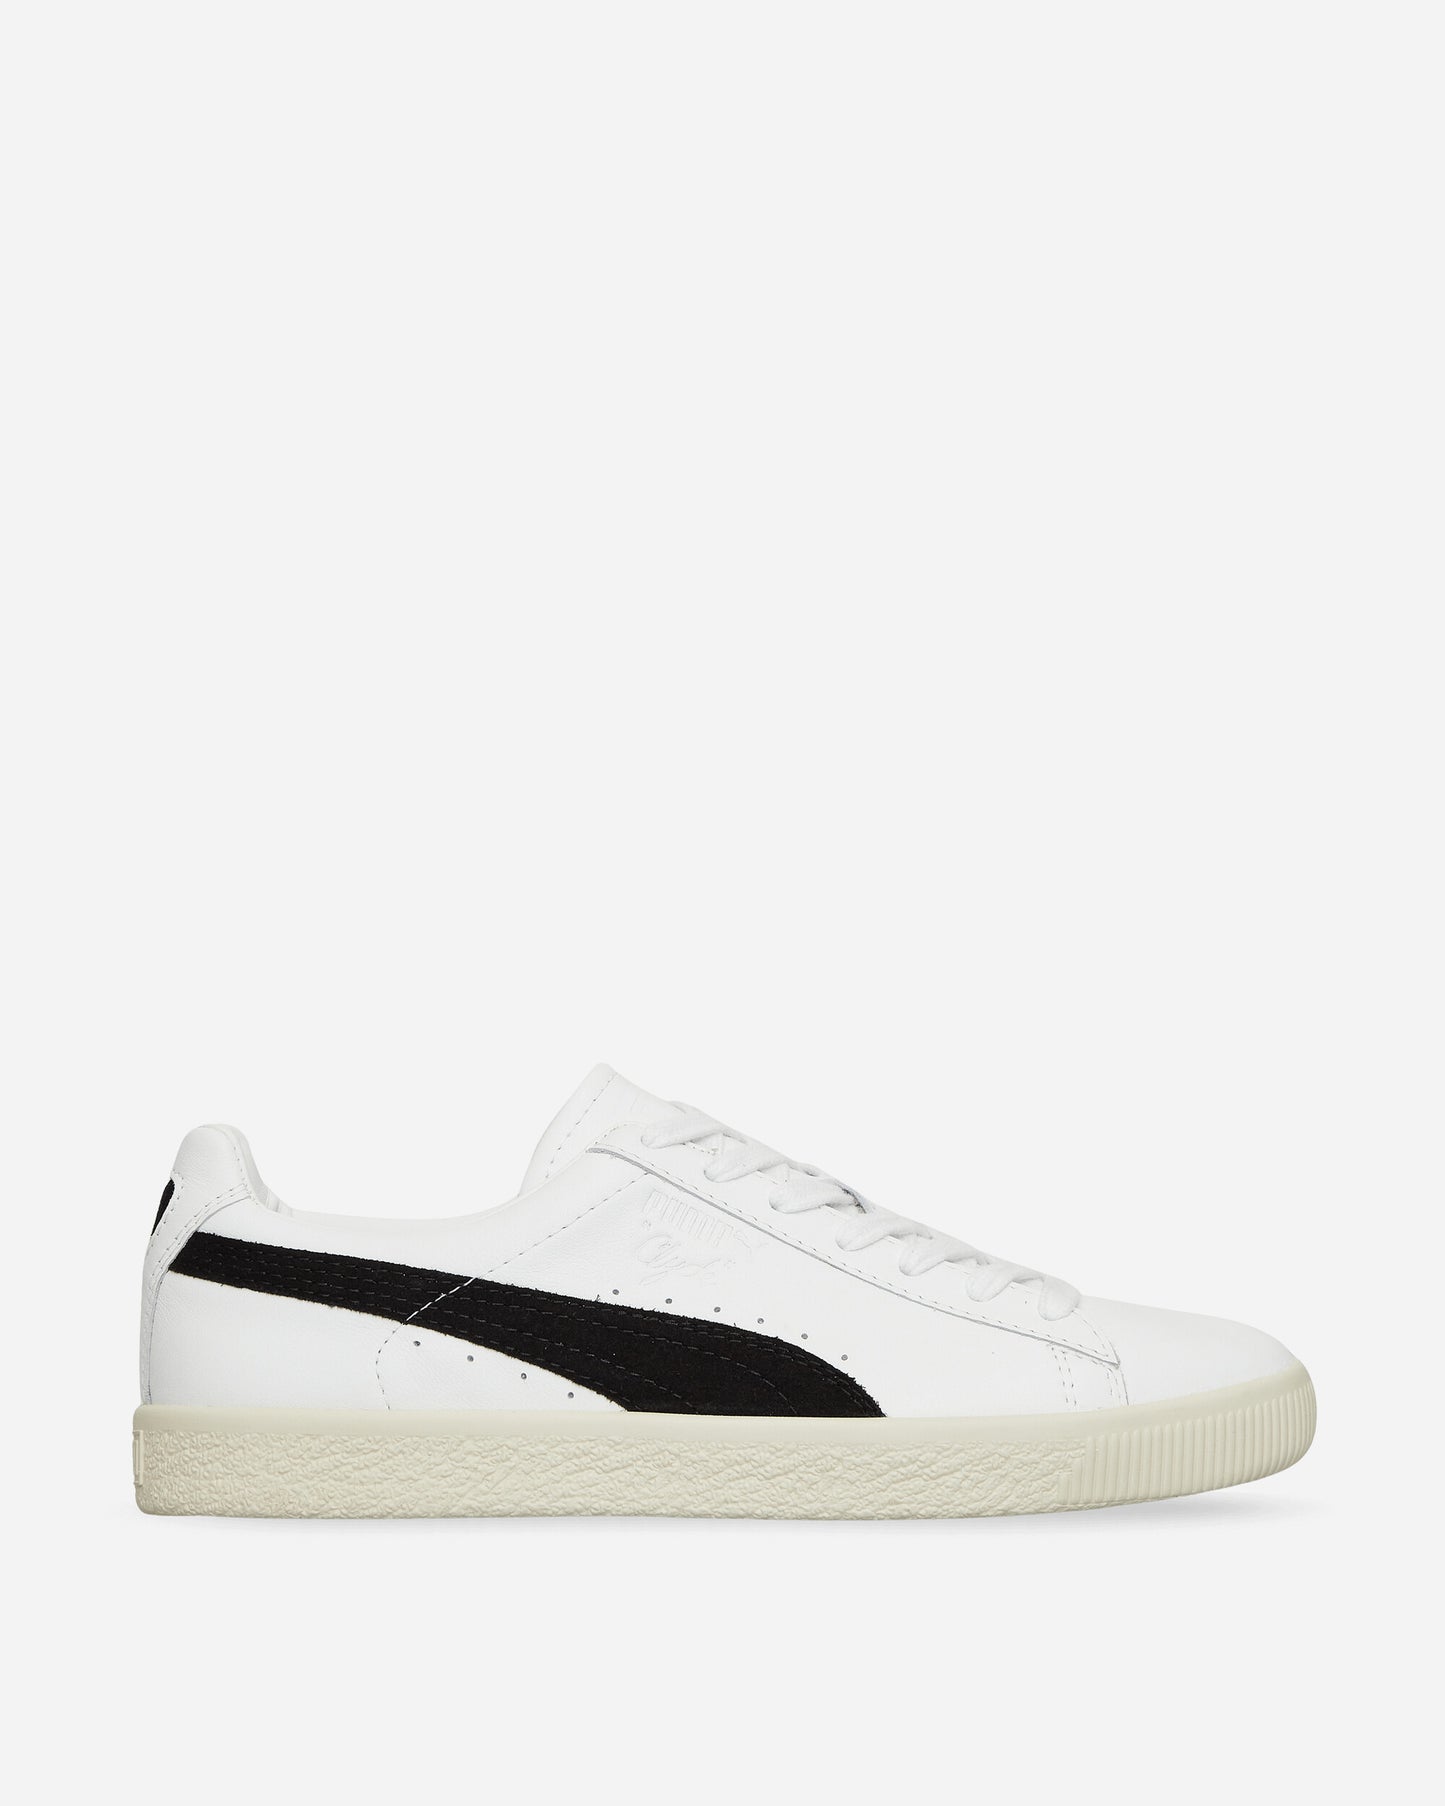 Puma Clyde Made in Germany White Sneakers Low 394834-01